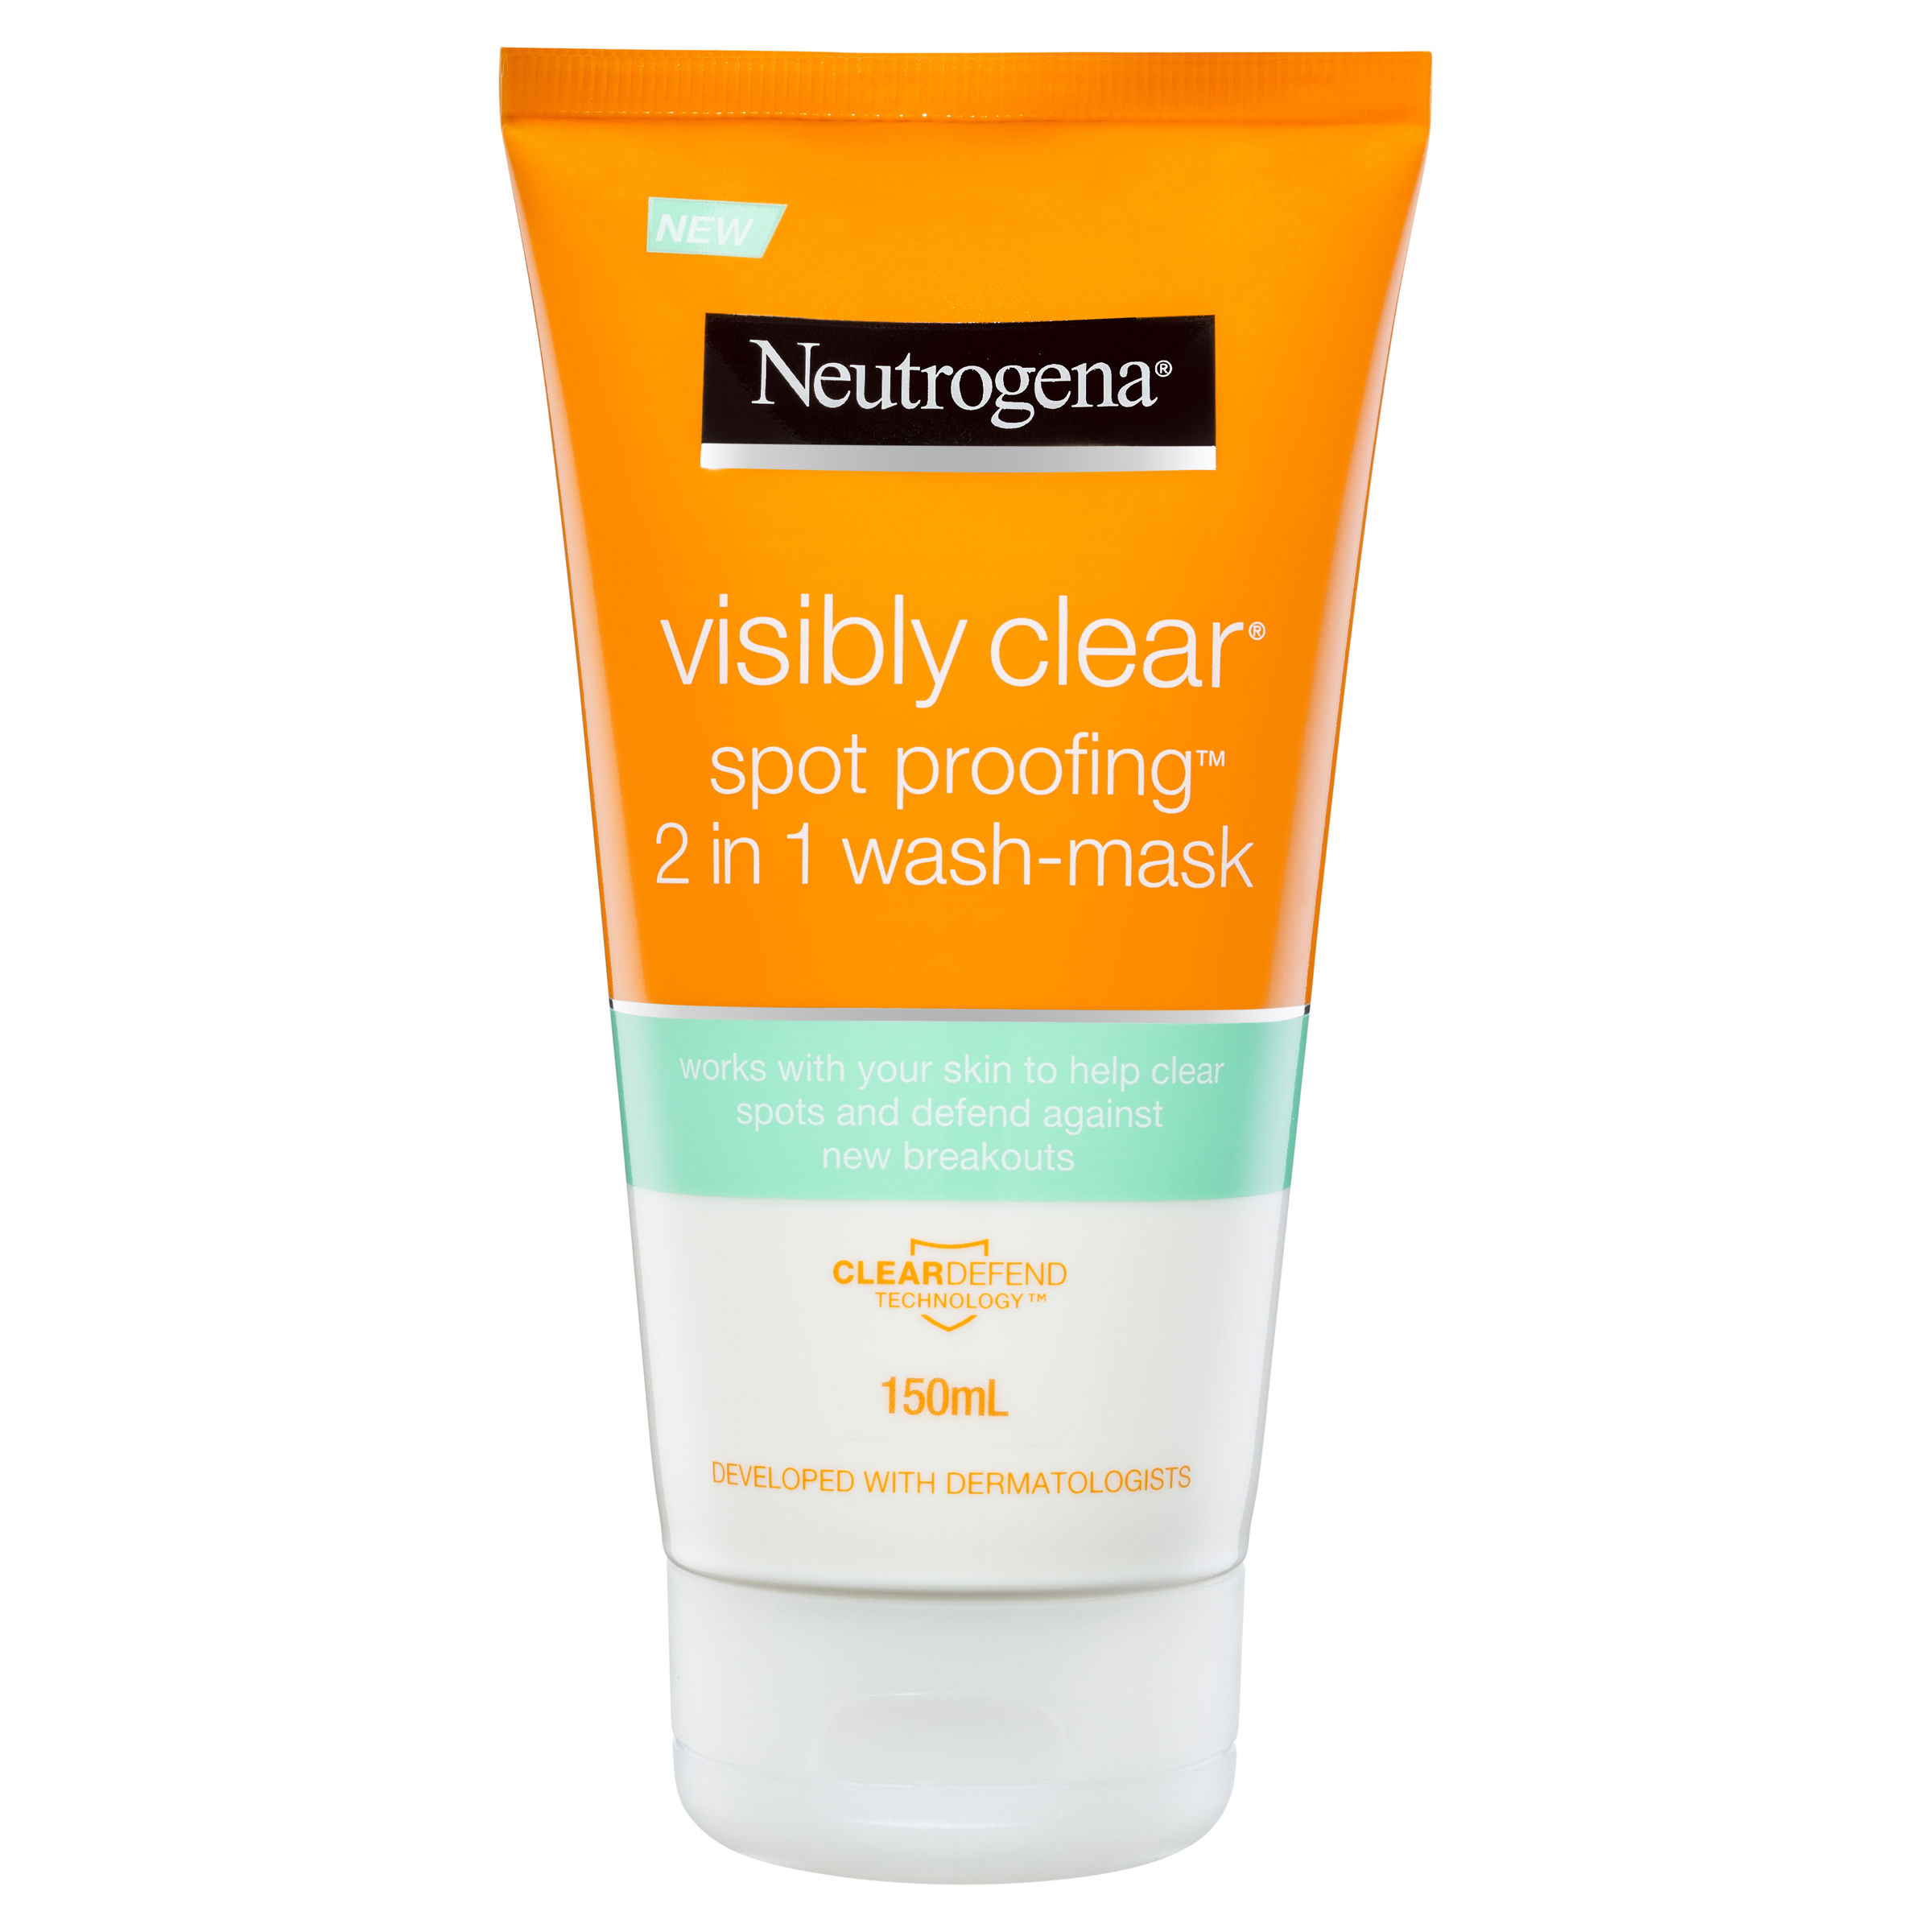 Neutrogena Visibly Clear Spot Proofing 2 in 1 Wash Mask